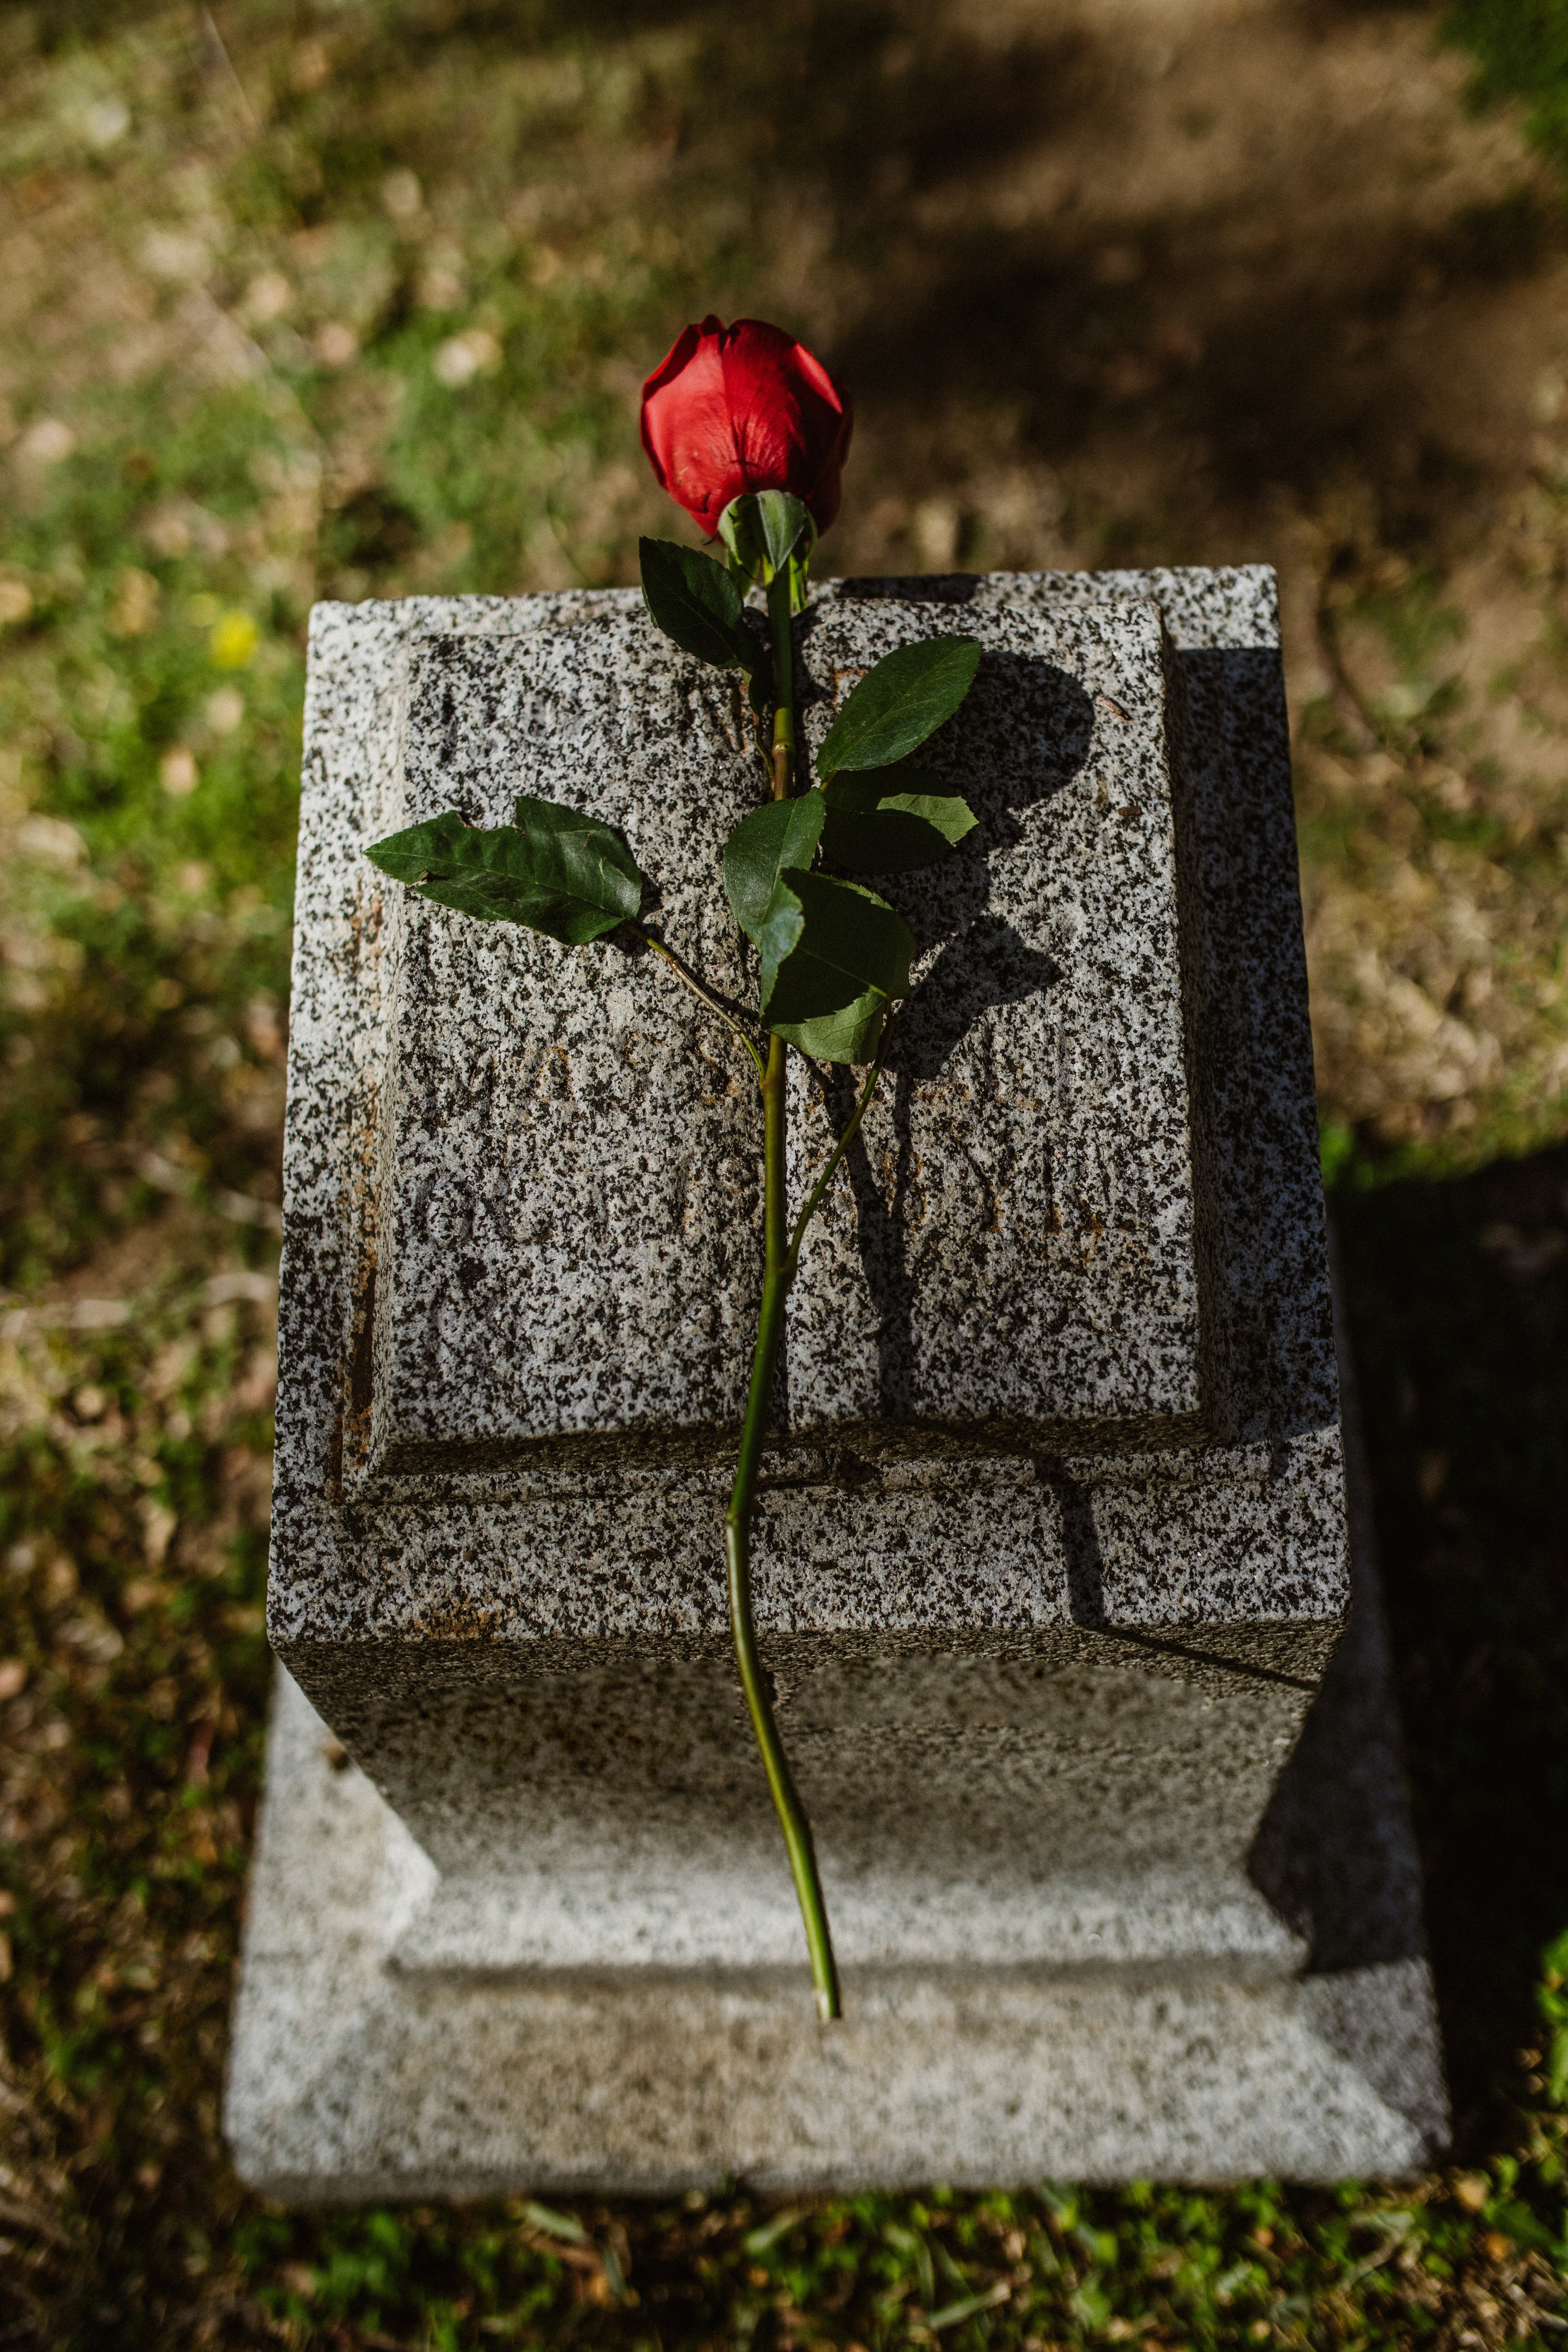 Mark's untimely death changed everything. | Source: Pexels